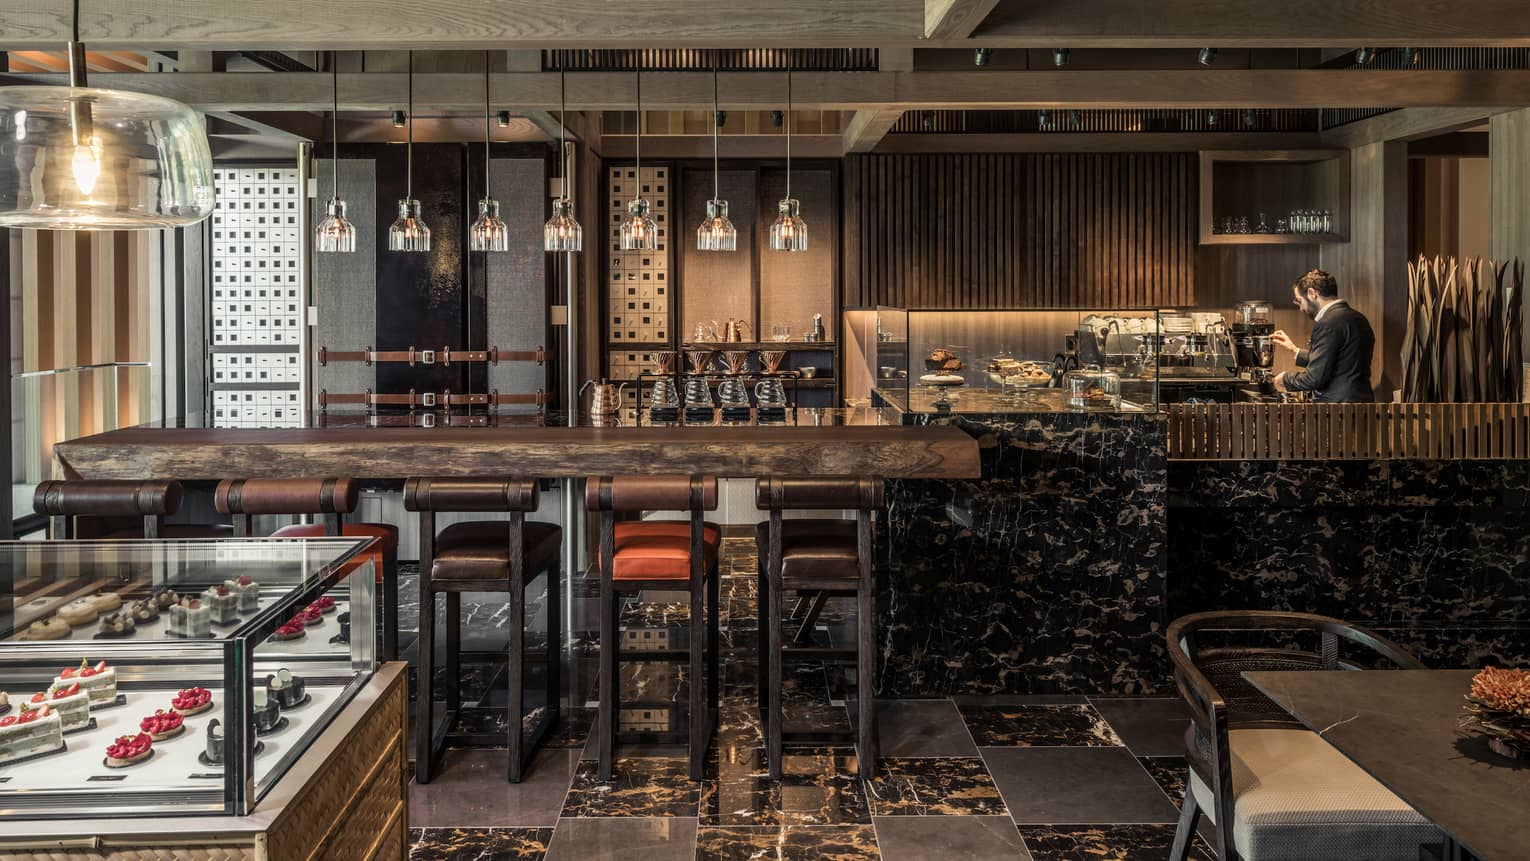 The Lounge rustic wood and black marble bar lined with leather stools, glass display with desserts